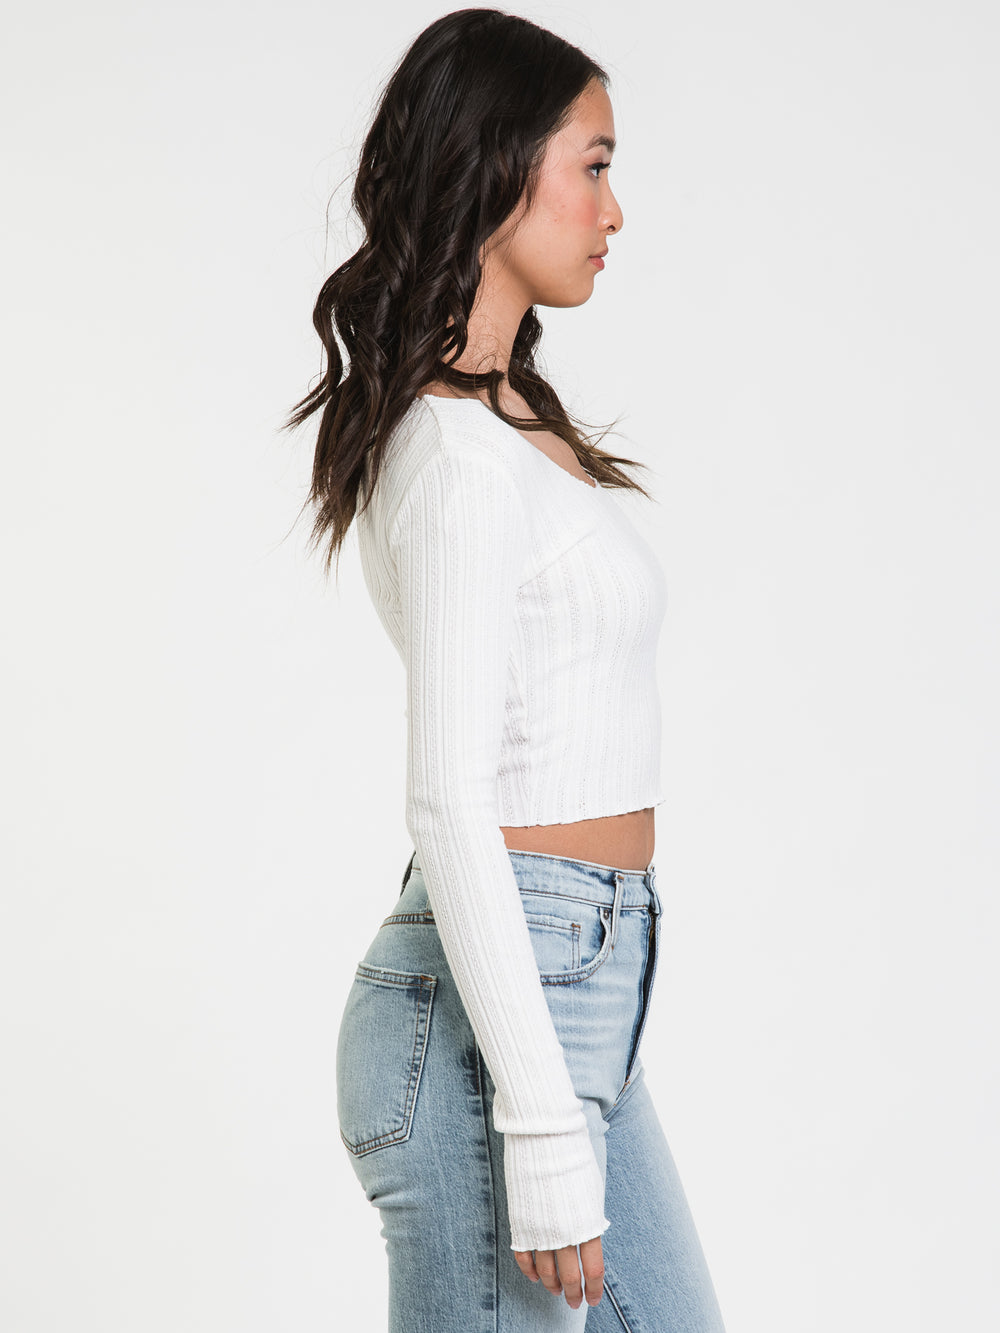 HARLOW TESS POINTELLE LONG SLEEVE - CLEARANCE